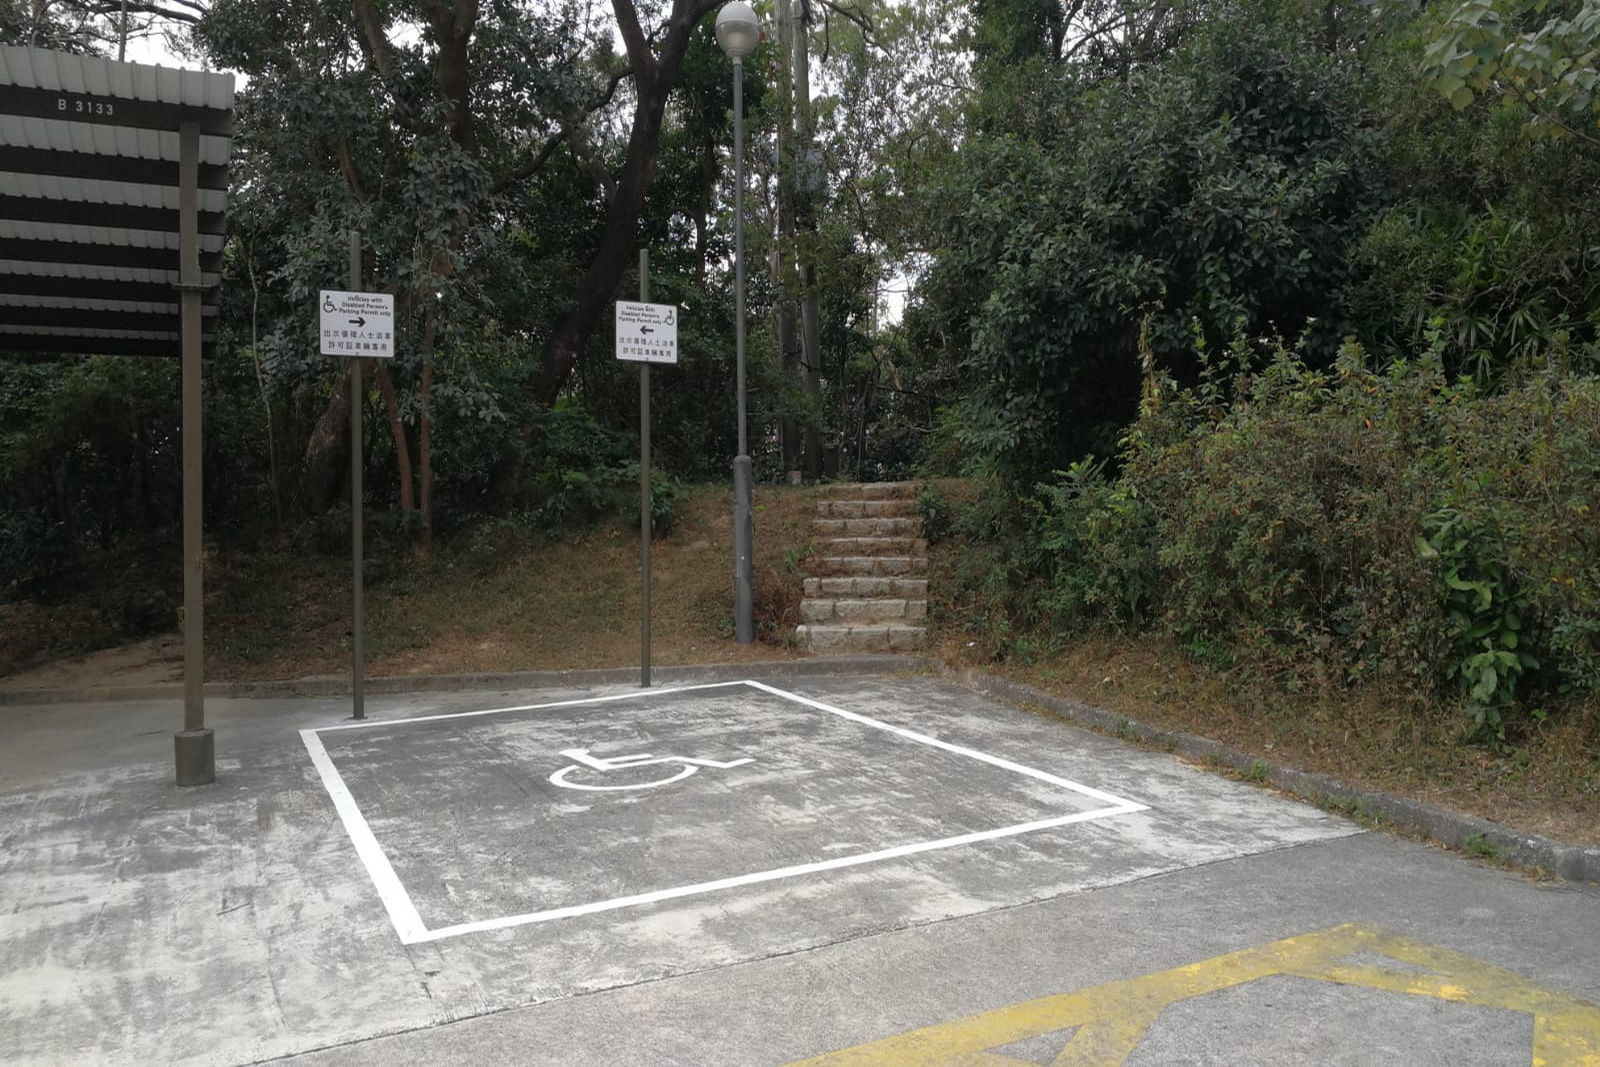 Barrier-free access